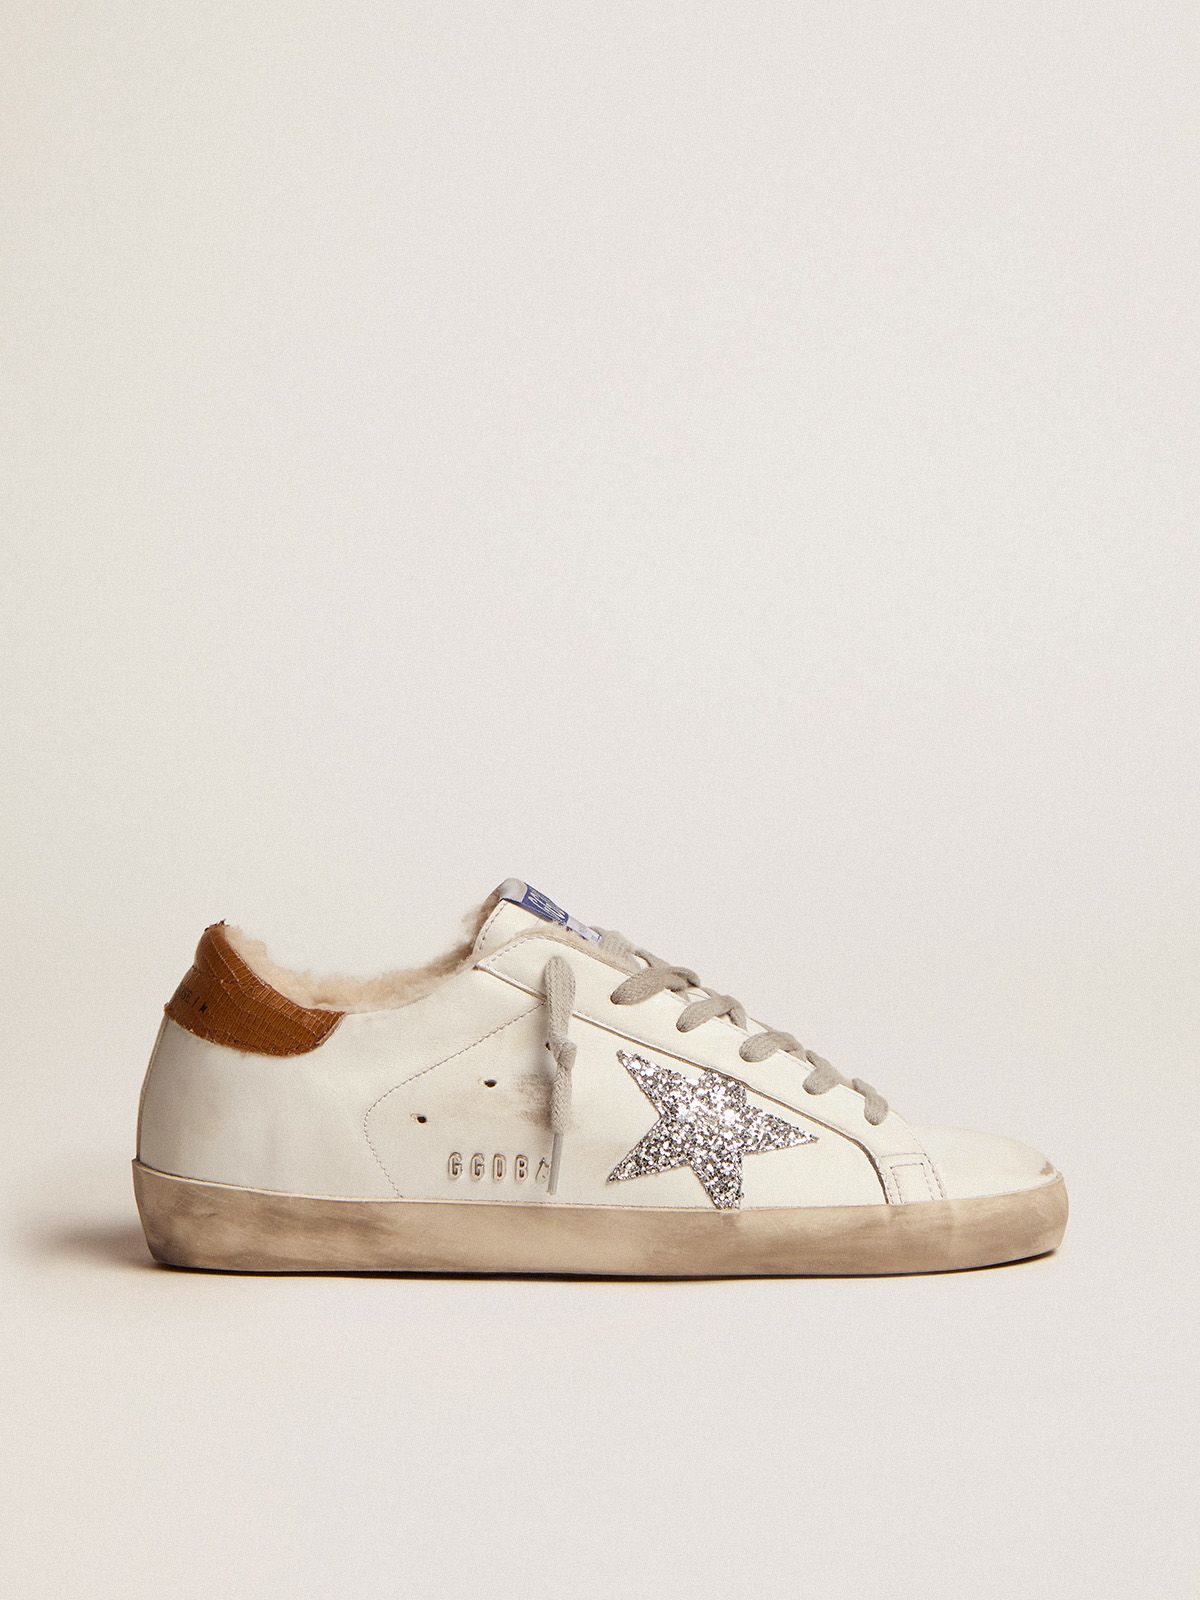 Super-Star sneakers with shearling lining, silver glitter star and lizard-print dove-gray leather heel tab | 